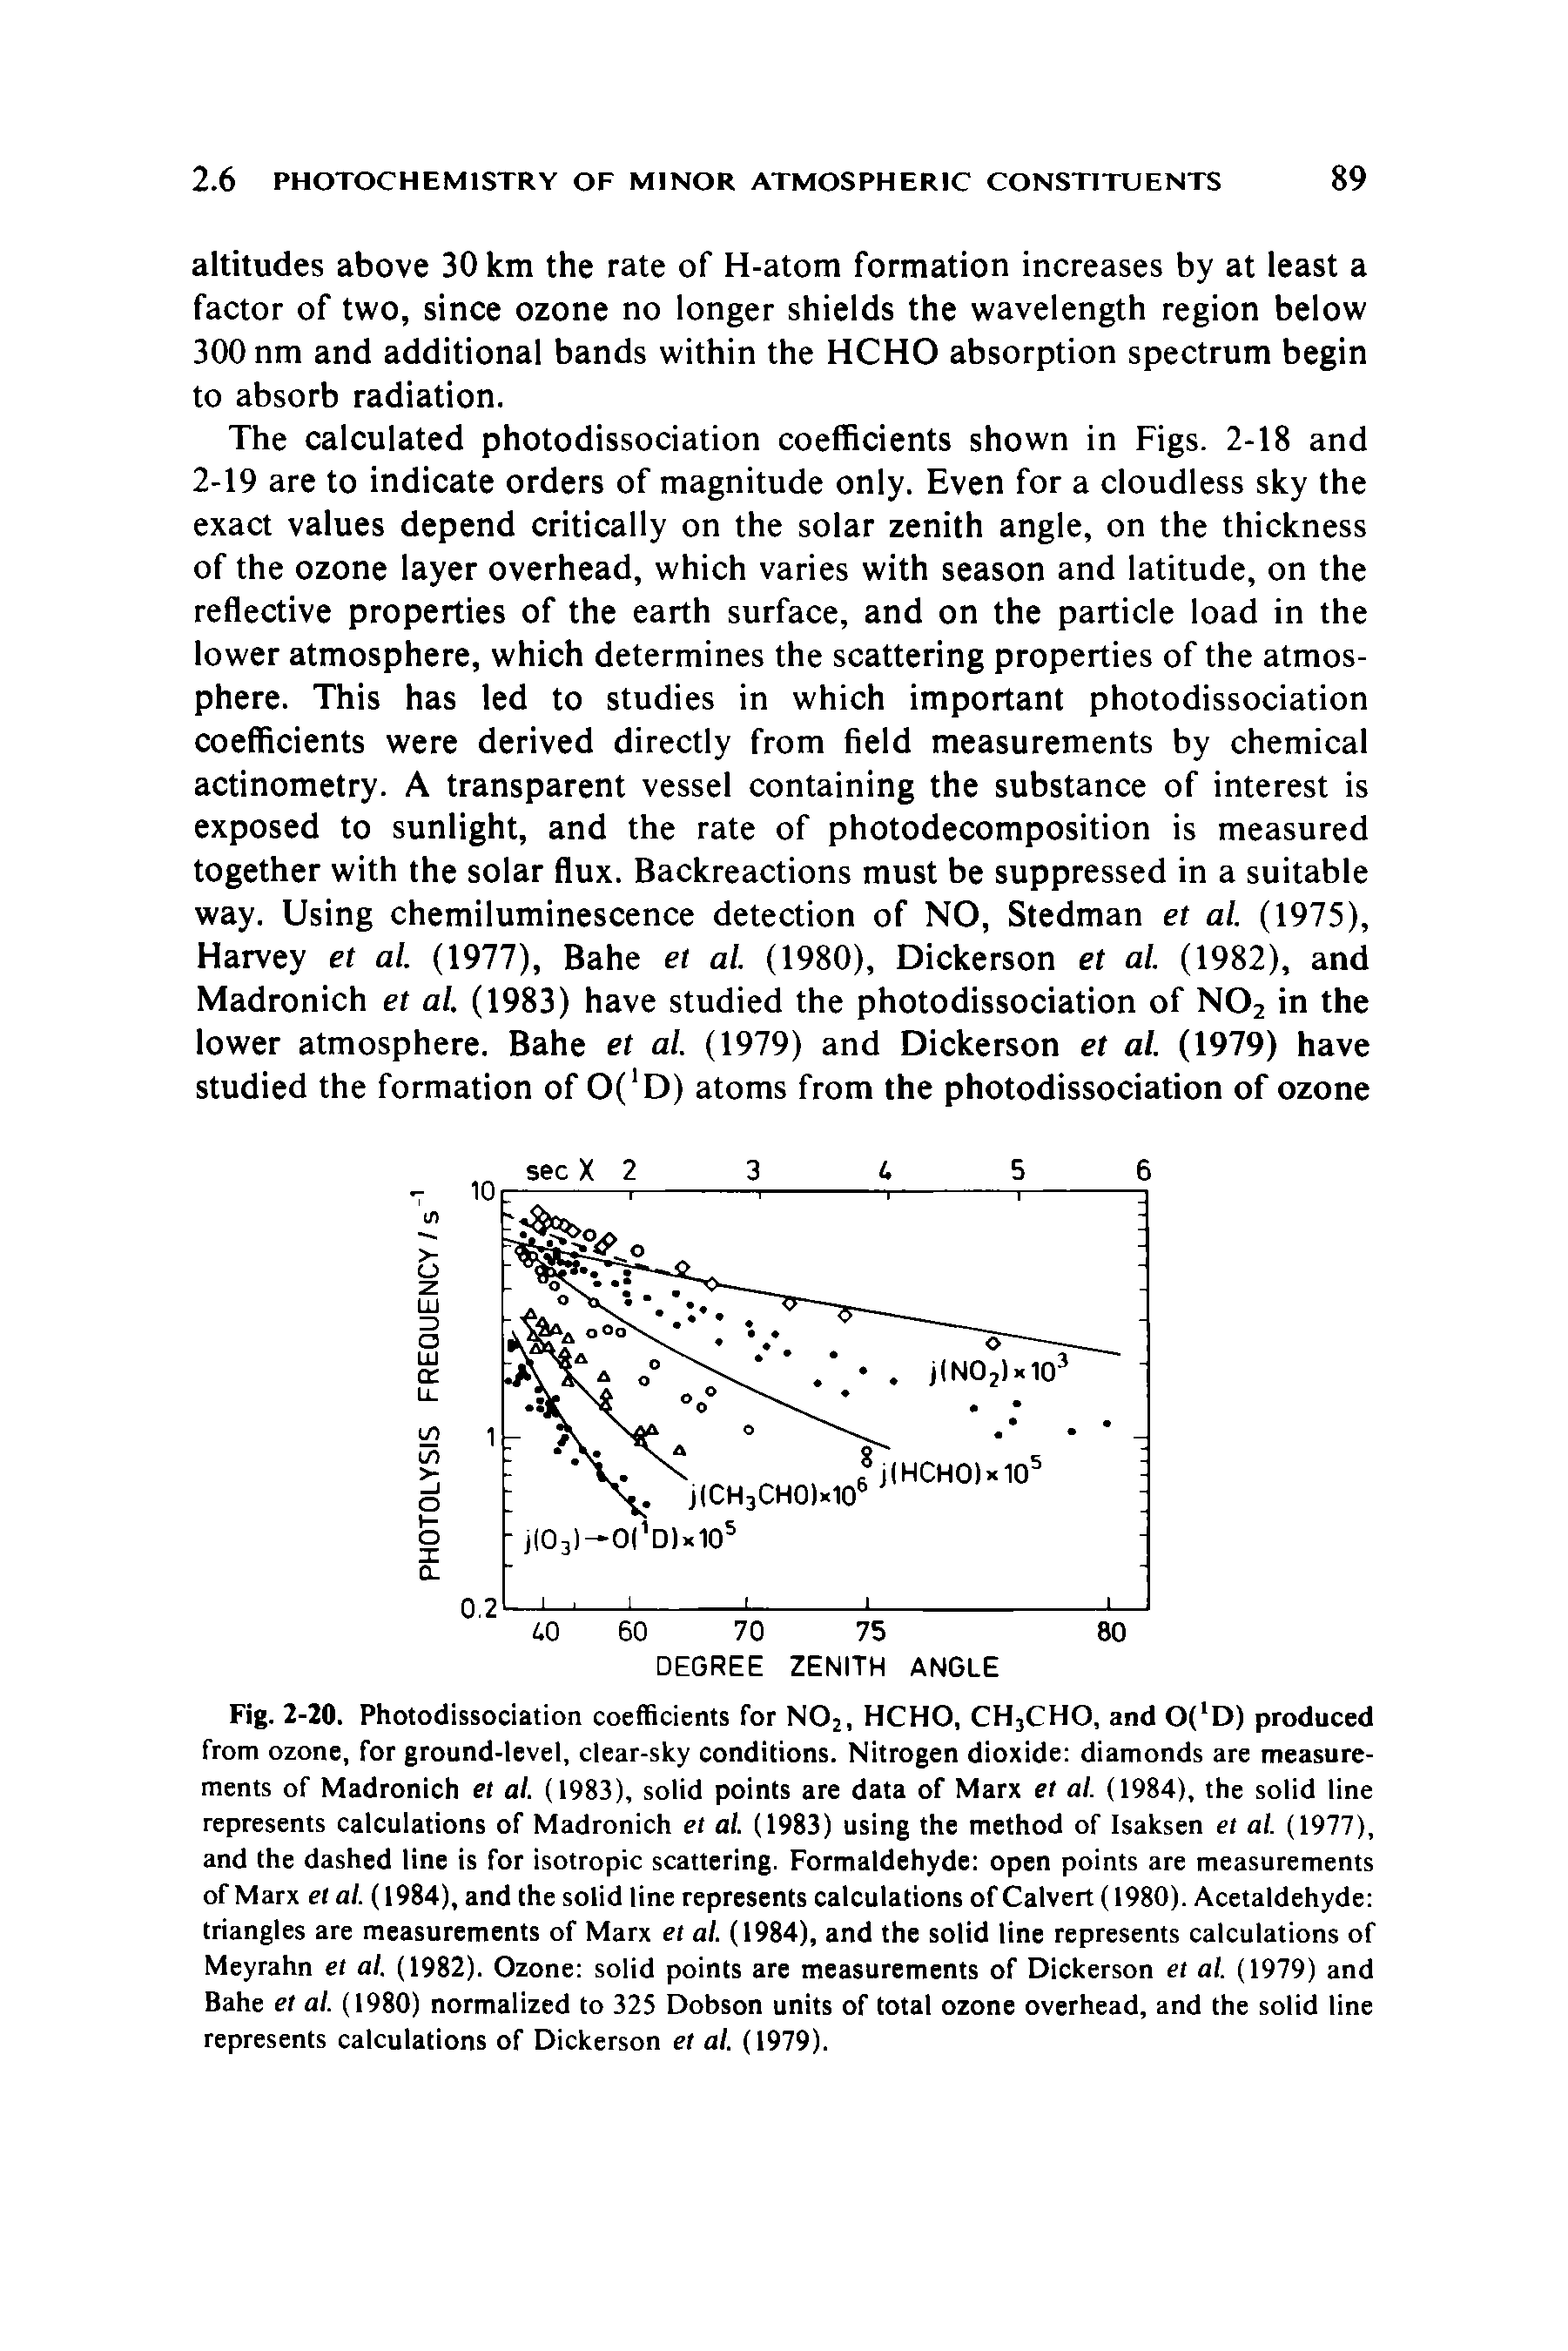 Fig. 2-20. Photodissociation coefficients for N02, HCHO, CHjCHO, and 0( D) produced from ozone, for ground-level, clear-sky conditions. Nitrogen dioxide diamonds are measurements of Madronich et al. (1983), solid points are data of Marx et al. (1984), the solid line represents calculations of Madronich et al. (1983) using the method of Isaksen et al. (1977), and the dashed line is for isotropic scattering. Formaldehyde open points are measurements of Marx el al. (1984), and the solid line represents calculations of Calvert (1980). Acetaldehyde triangles are measurements of Marx et al. (1984), and the solid line represents calculations of Meyrahn et al. (1982). Ozone solid points are measurements of Dickerson et al. (1979) and Bahe et al. (1980) normalized to 325 Dobson units of total ozone overhead, and the solid line represents calculations of Dickerson et al. (1979).